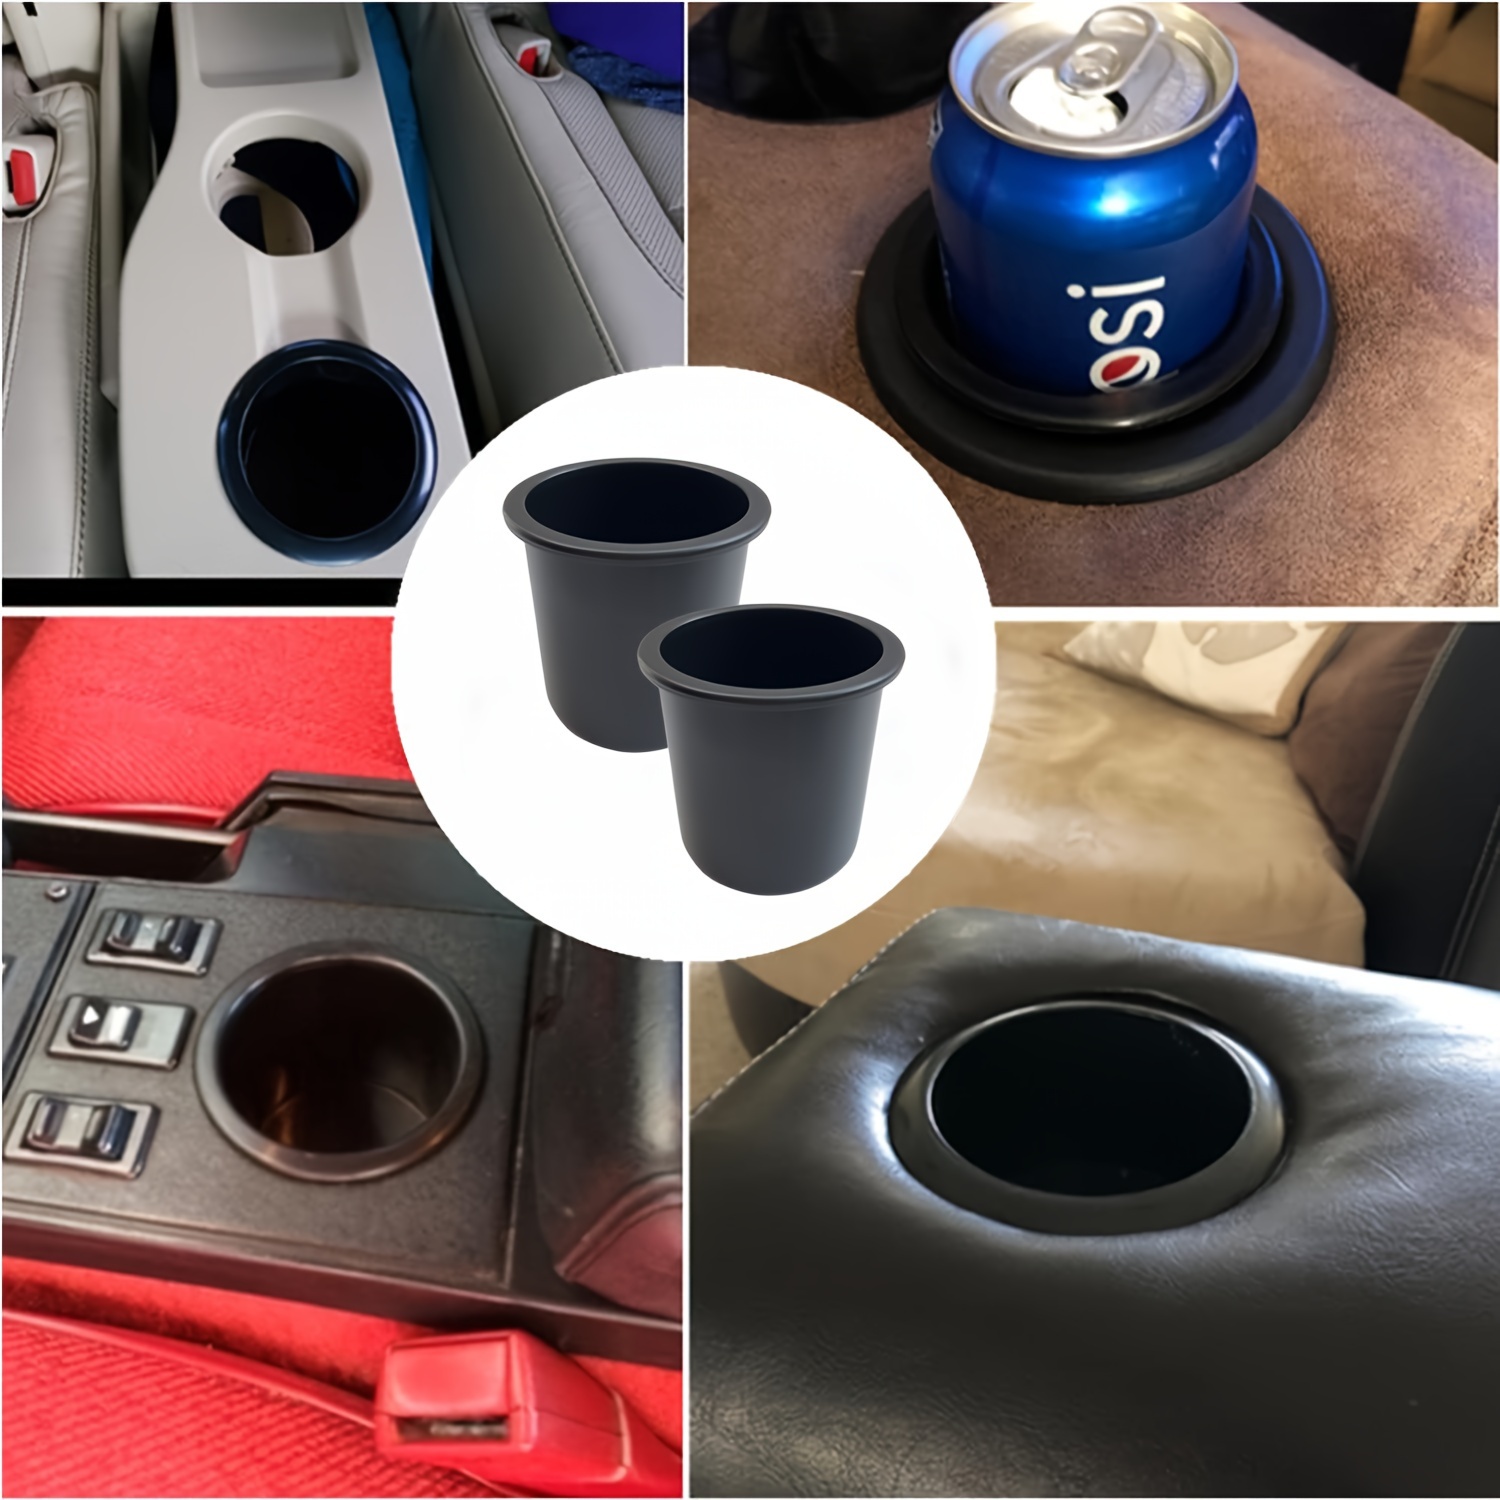 Cup Holder Insert 2pcs for RV Boat Car Couch Golf Cart, Universal Cup  Holder